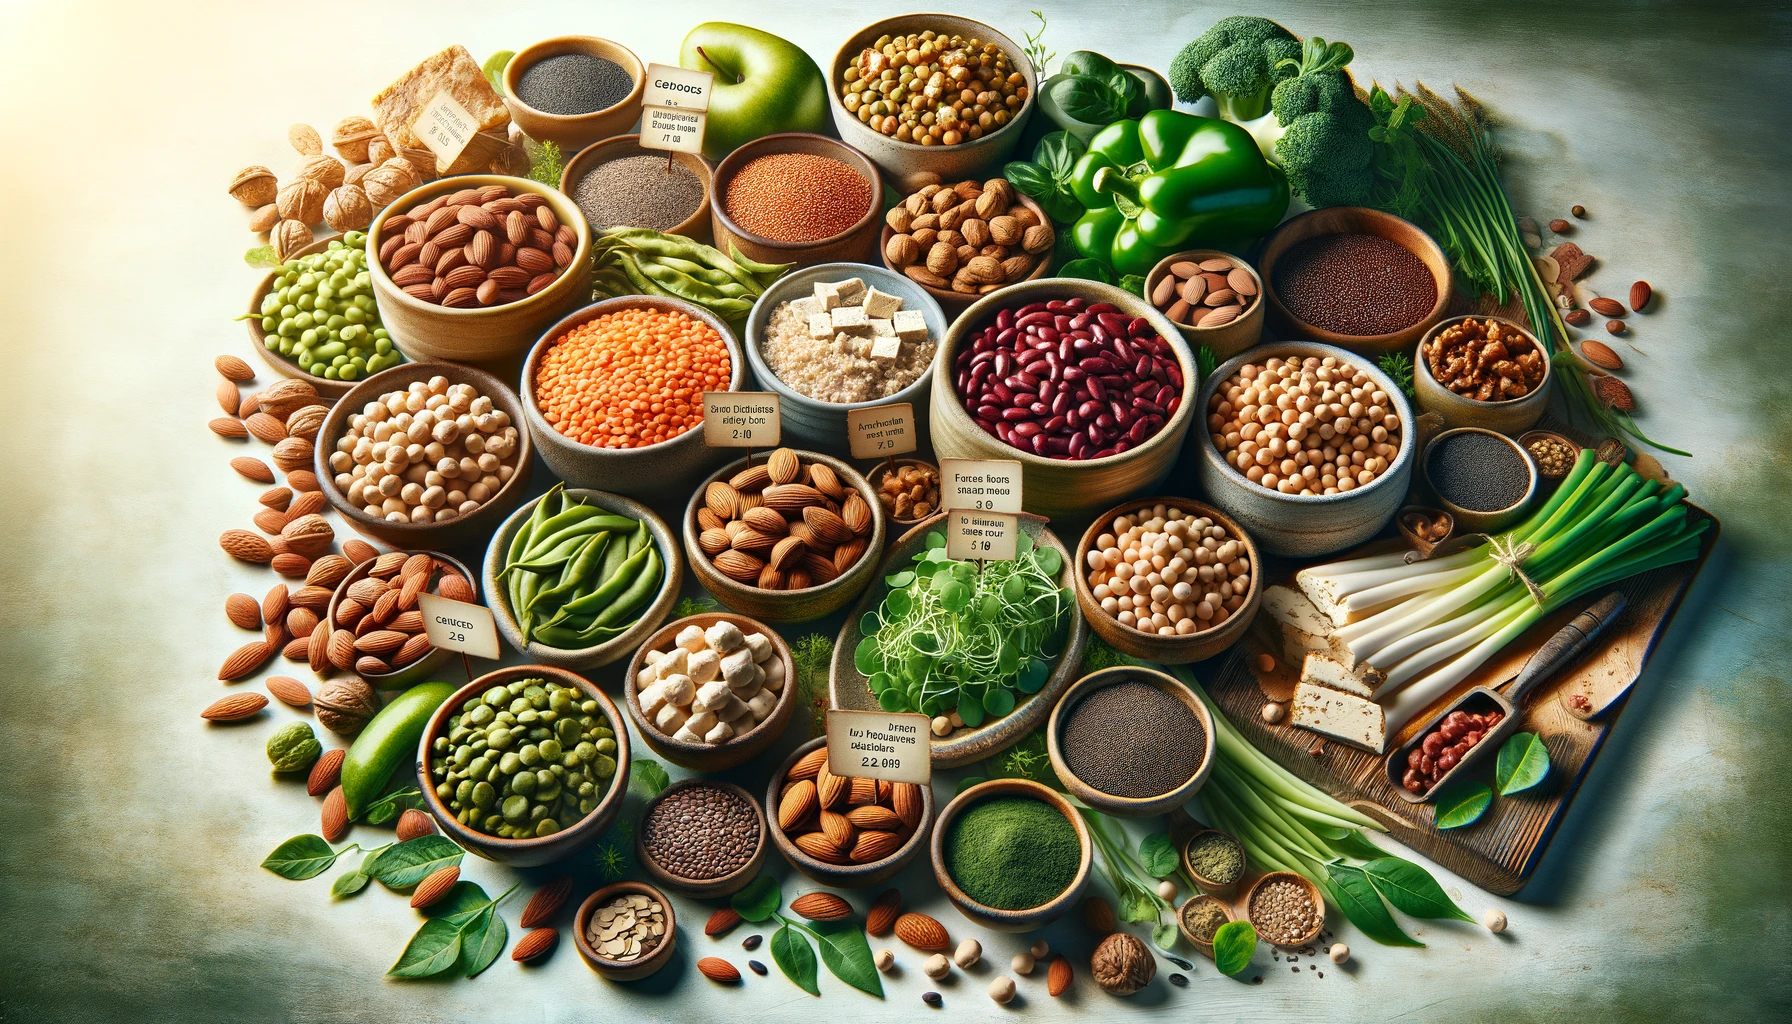 Briefly introduce the growing interest in plant-based diets and the importance of protein in a balanced diet. Highlight the misconceptions around plant-based protein and showcase its nutritional benefits.